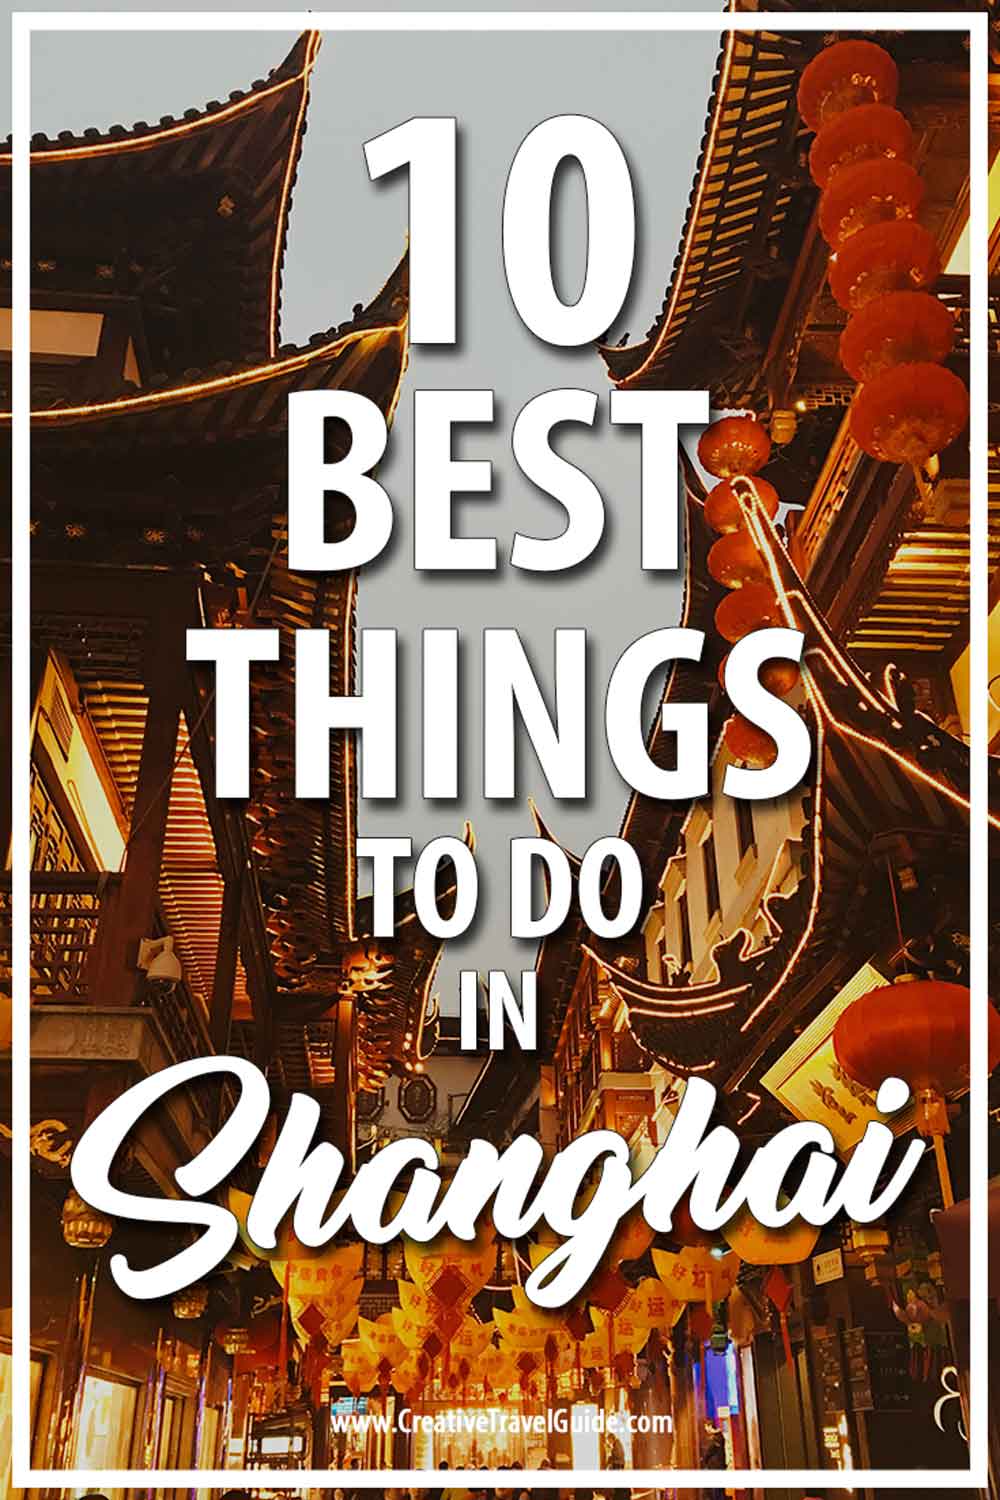 10 best things to do in Shanghai